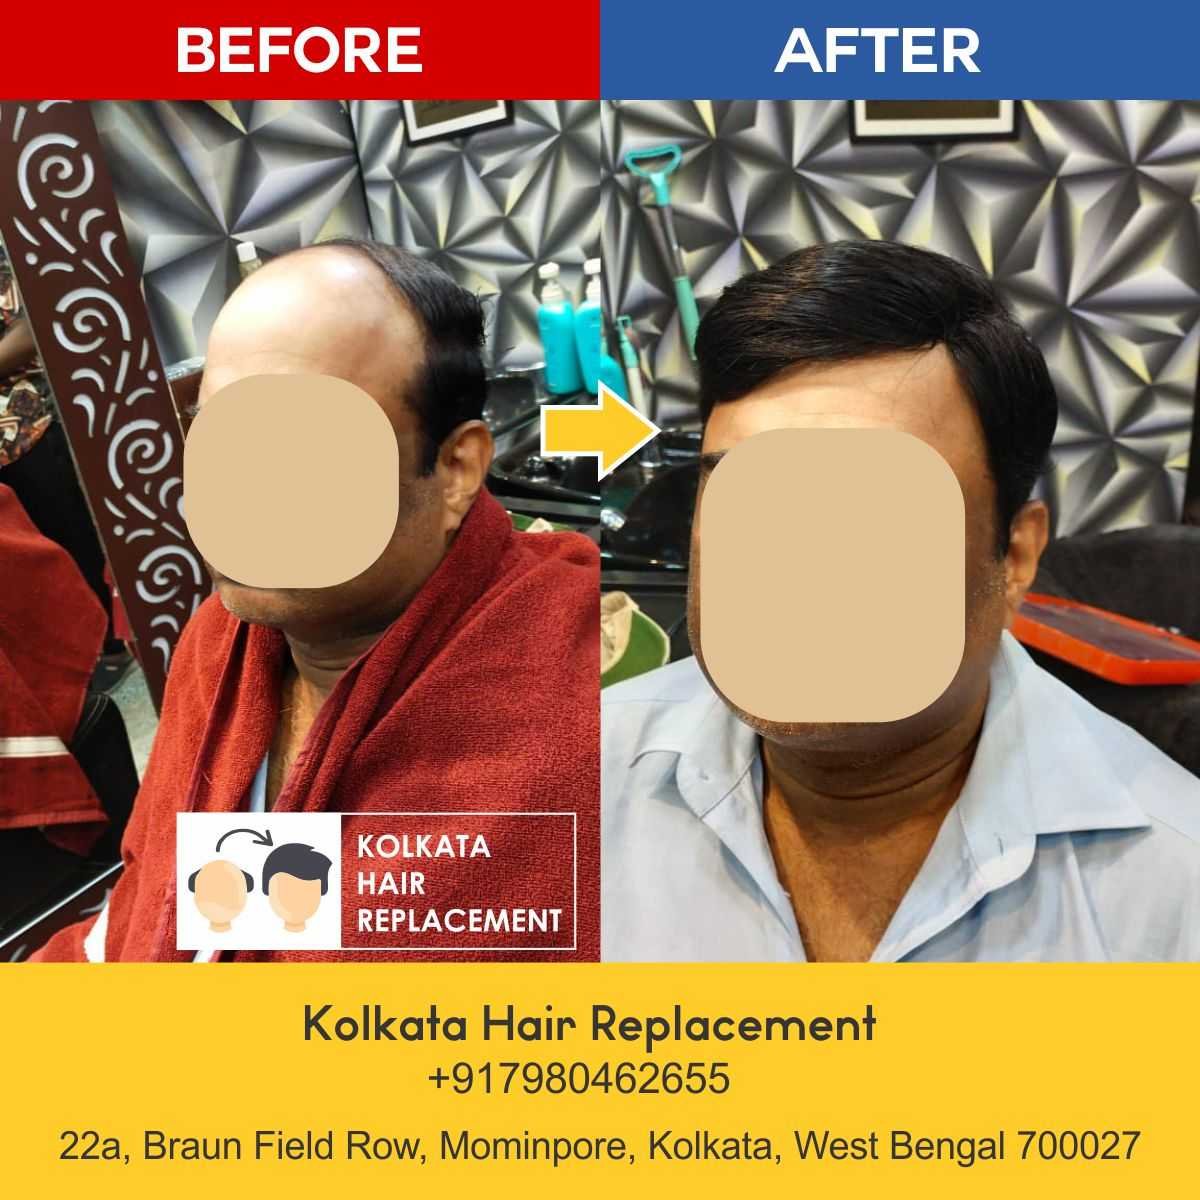 men-hair-wig-patch-kolkata-hair-replacement-before-after-06